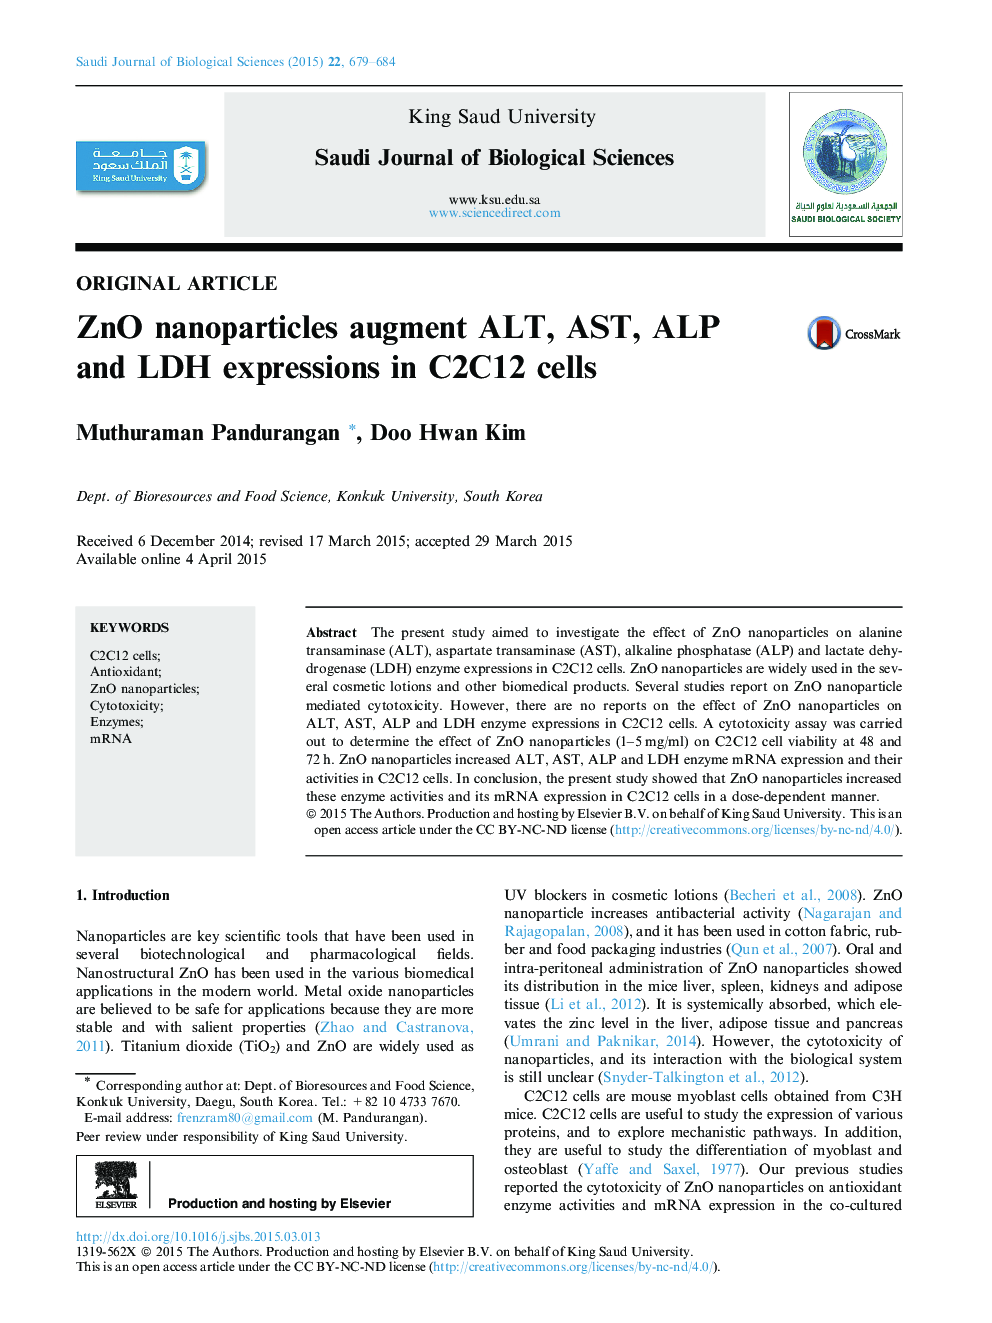 ZnO nanoparticles augment ALT, AST, ALP and LDH expressions in C2C12 cells 